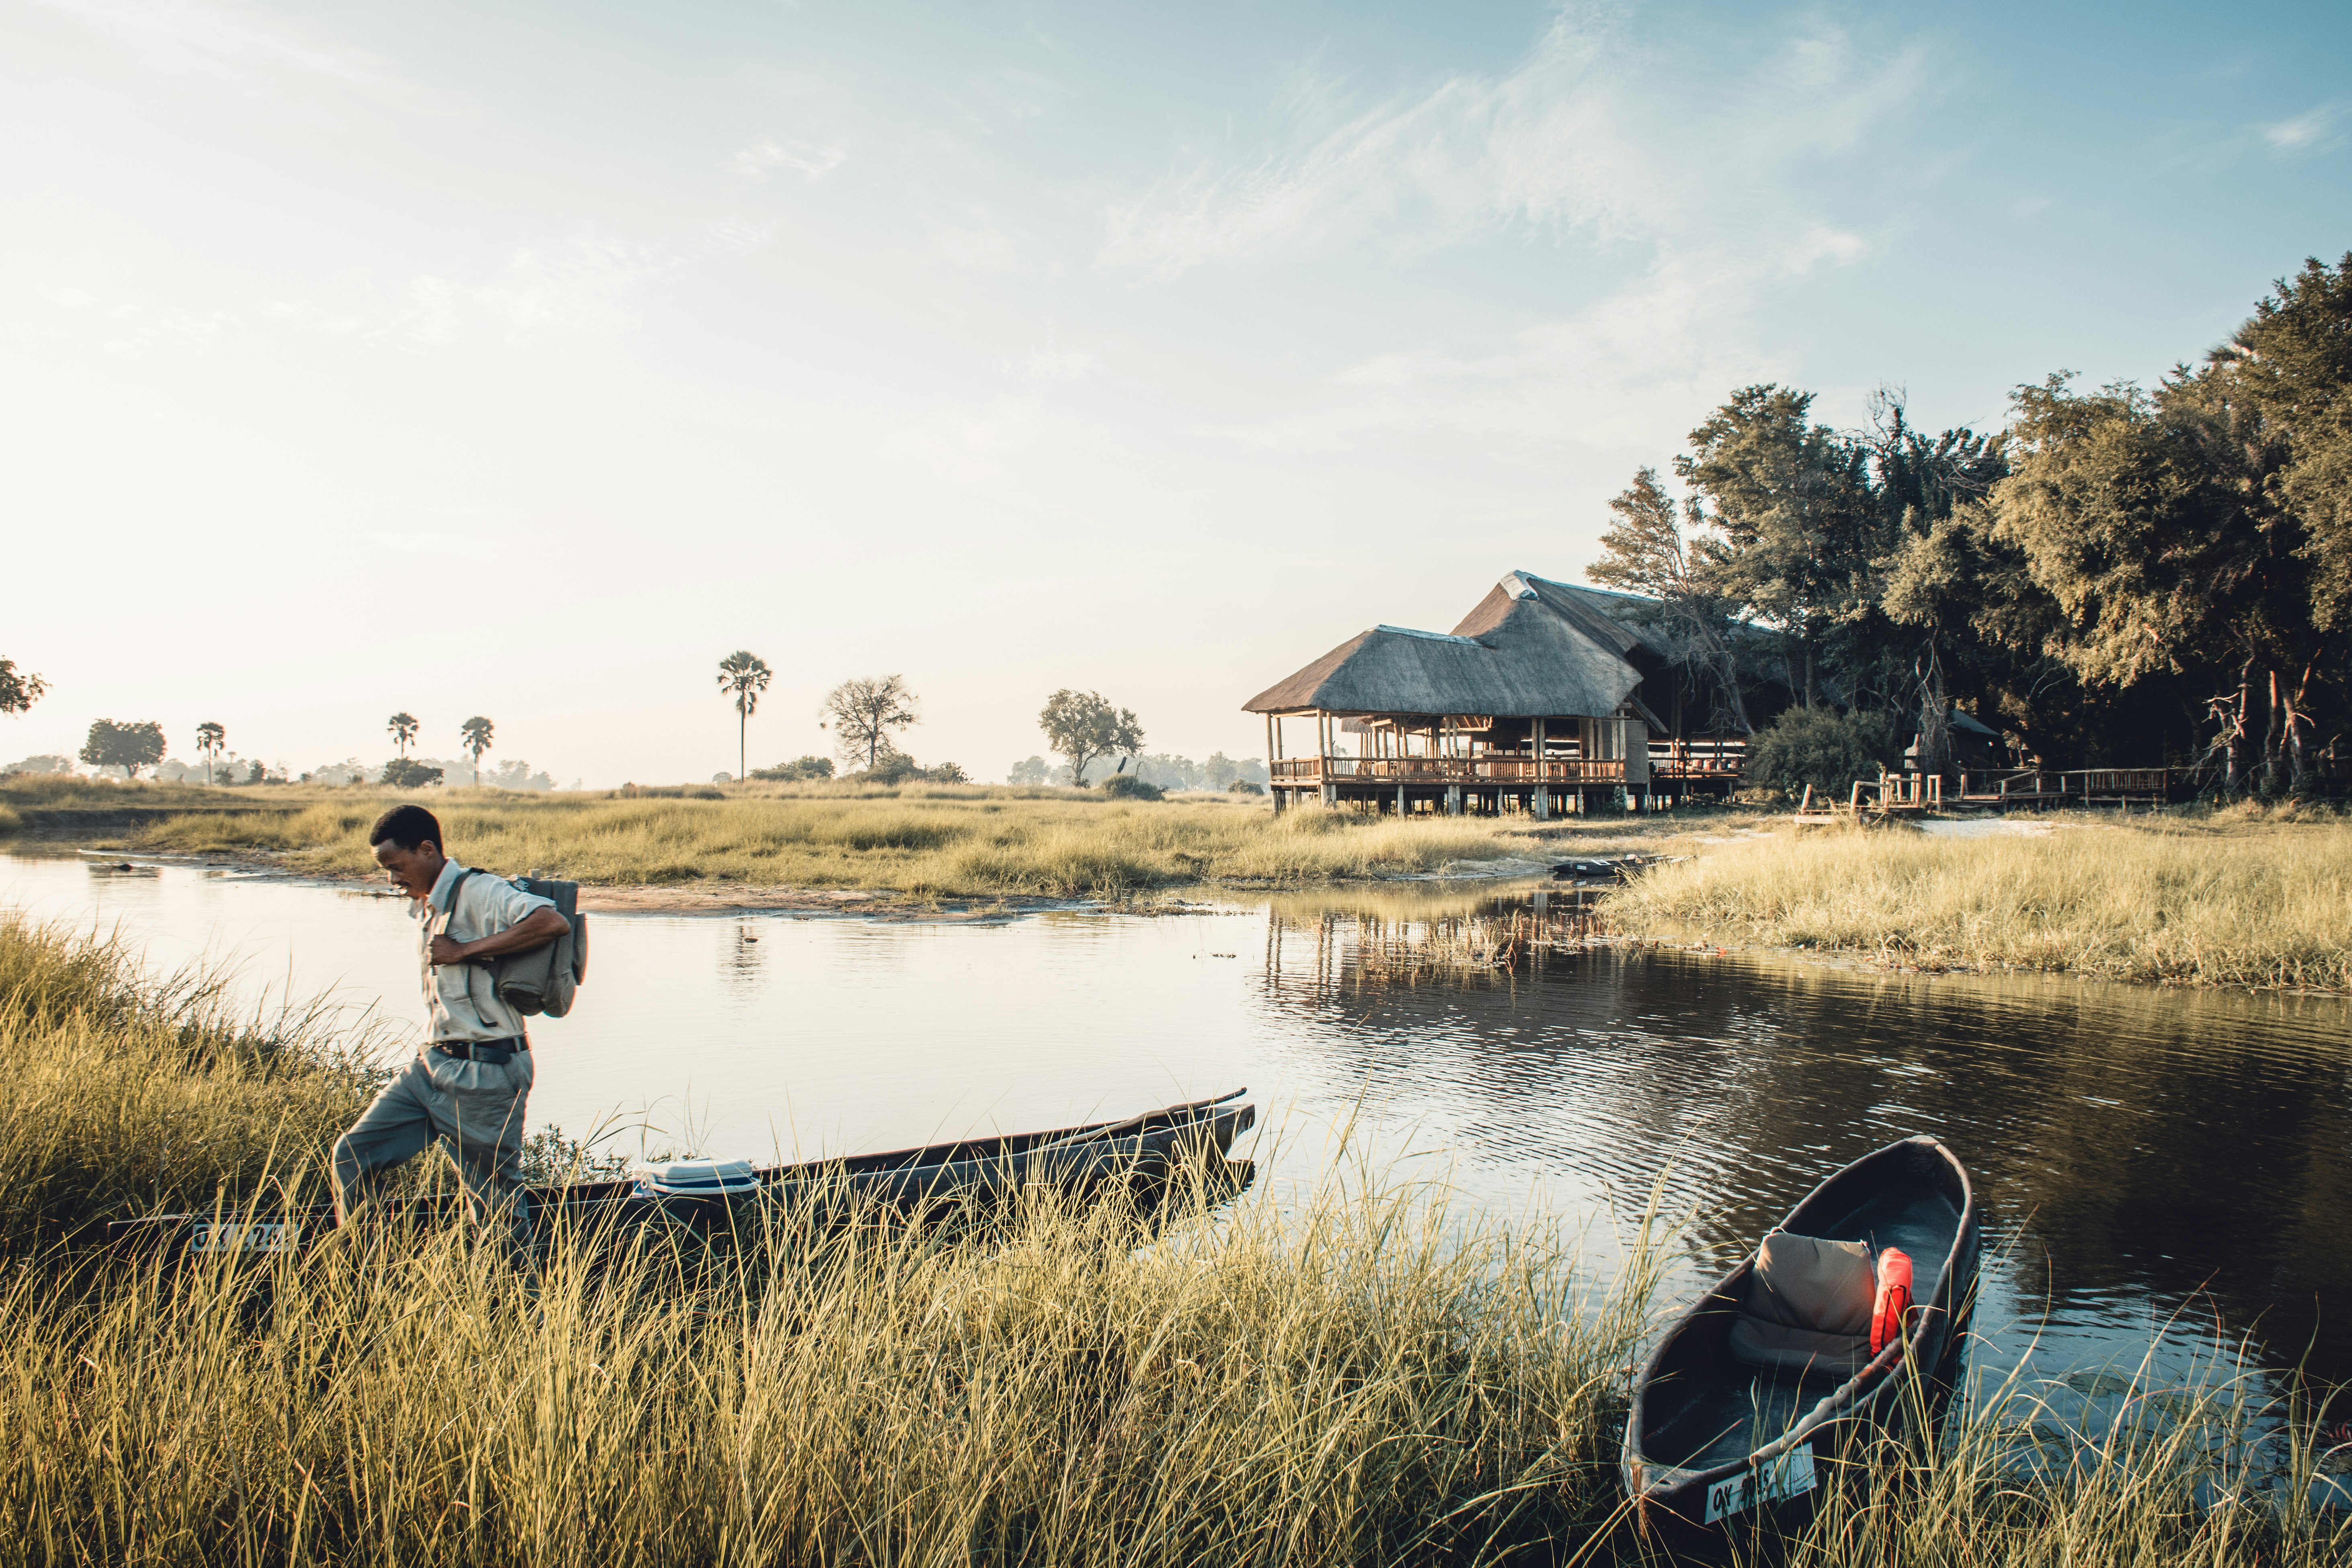 A man in grey twill slacks and a cream button down shirt with a full backpack steps through grasses on teh edge of the water where canoes are beached in the Okavango Delta. Across the water on the opposite shore are buildings with grass roofs and a cluster of trees.